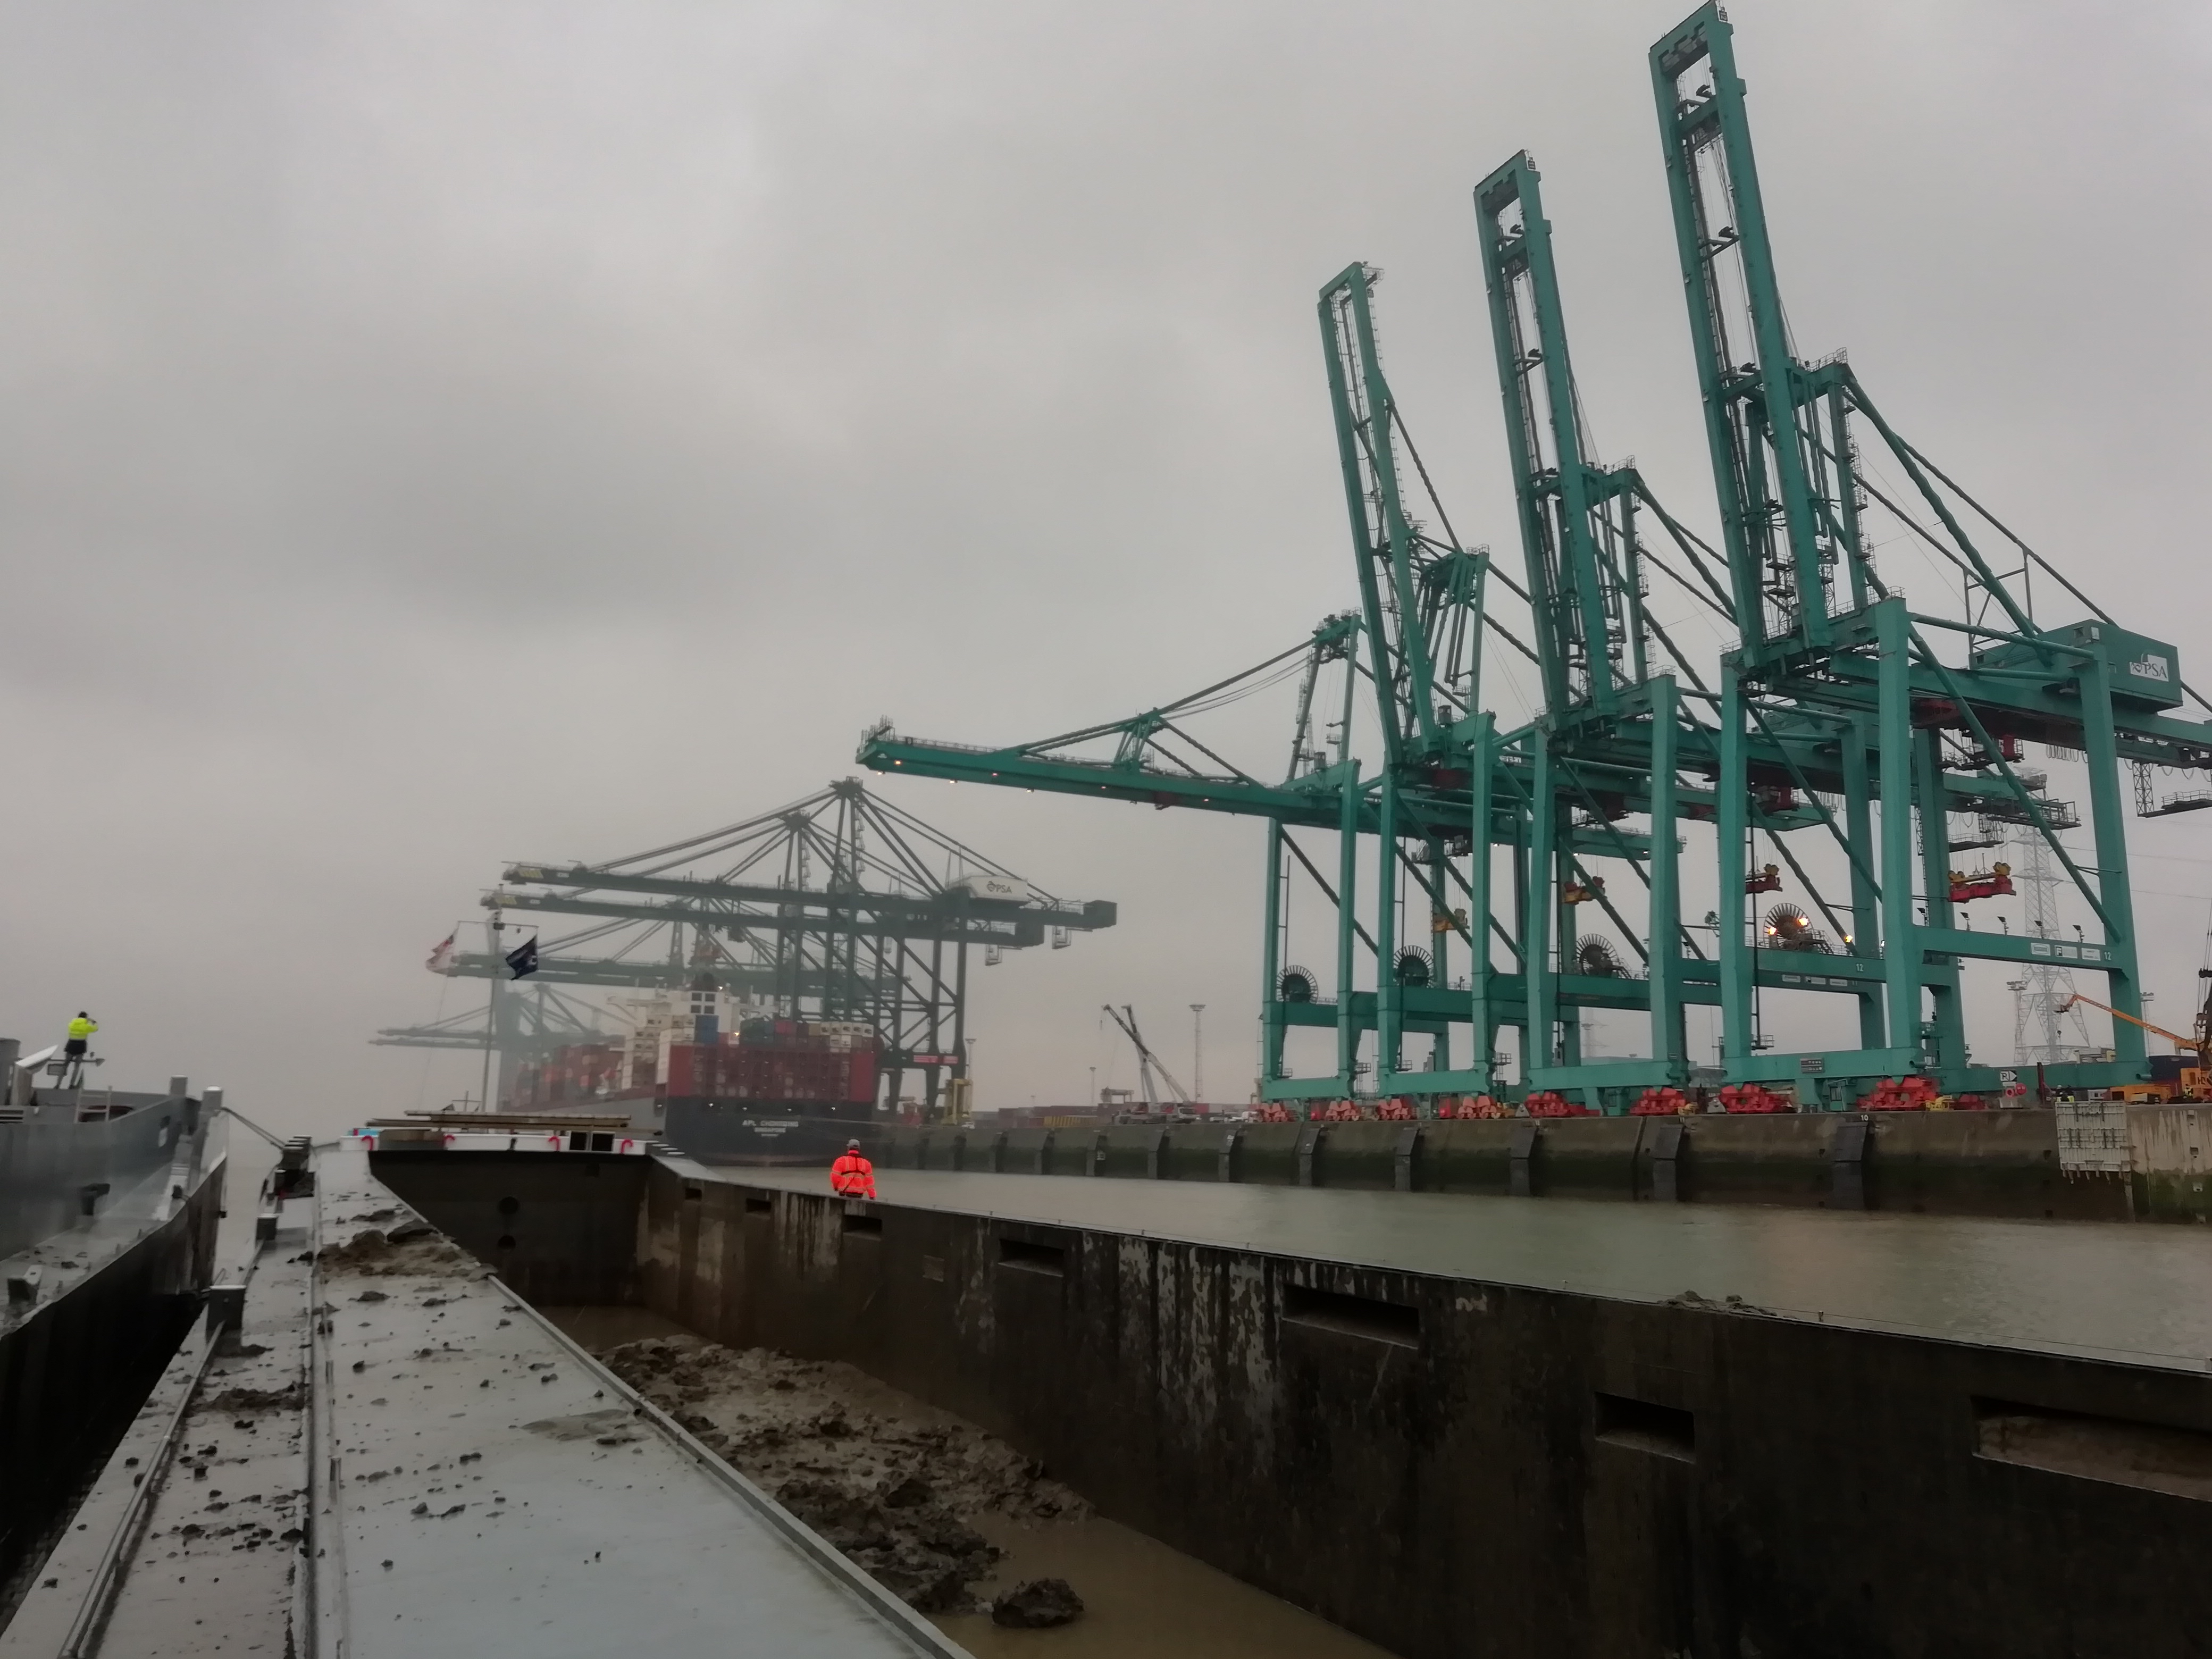 Maintenance and infrastructure dredging works in the port of Antwerp